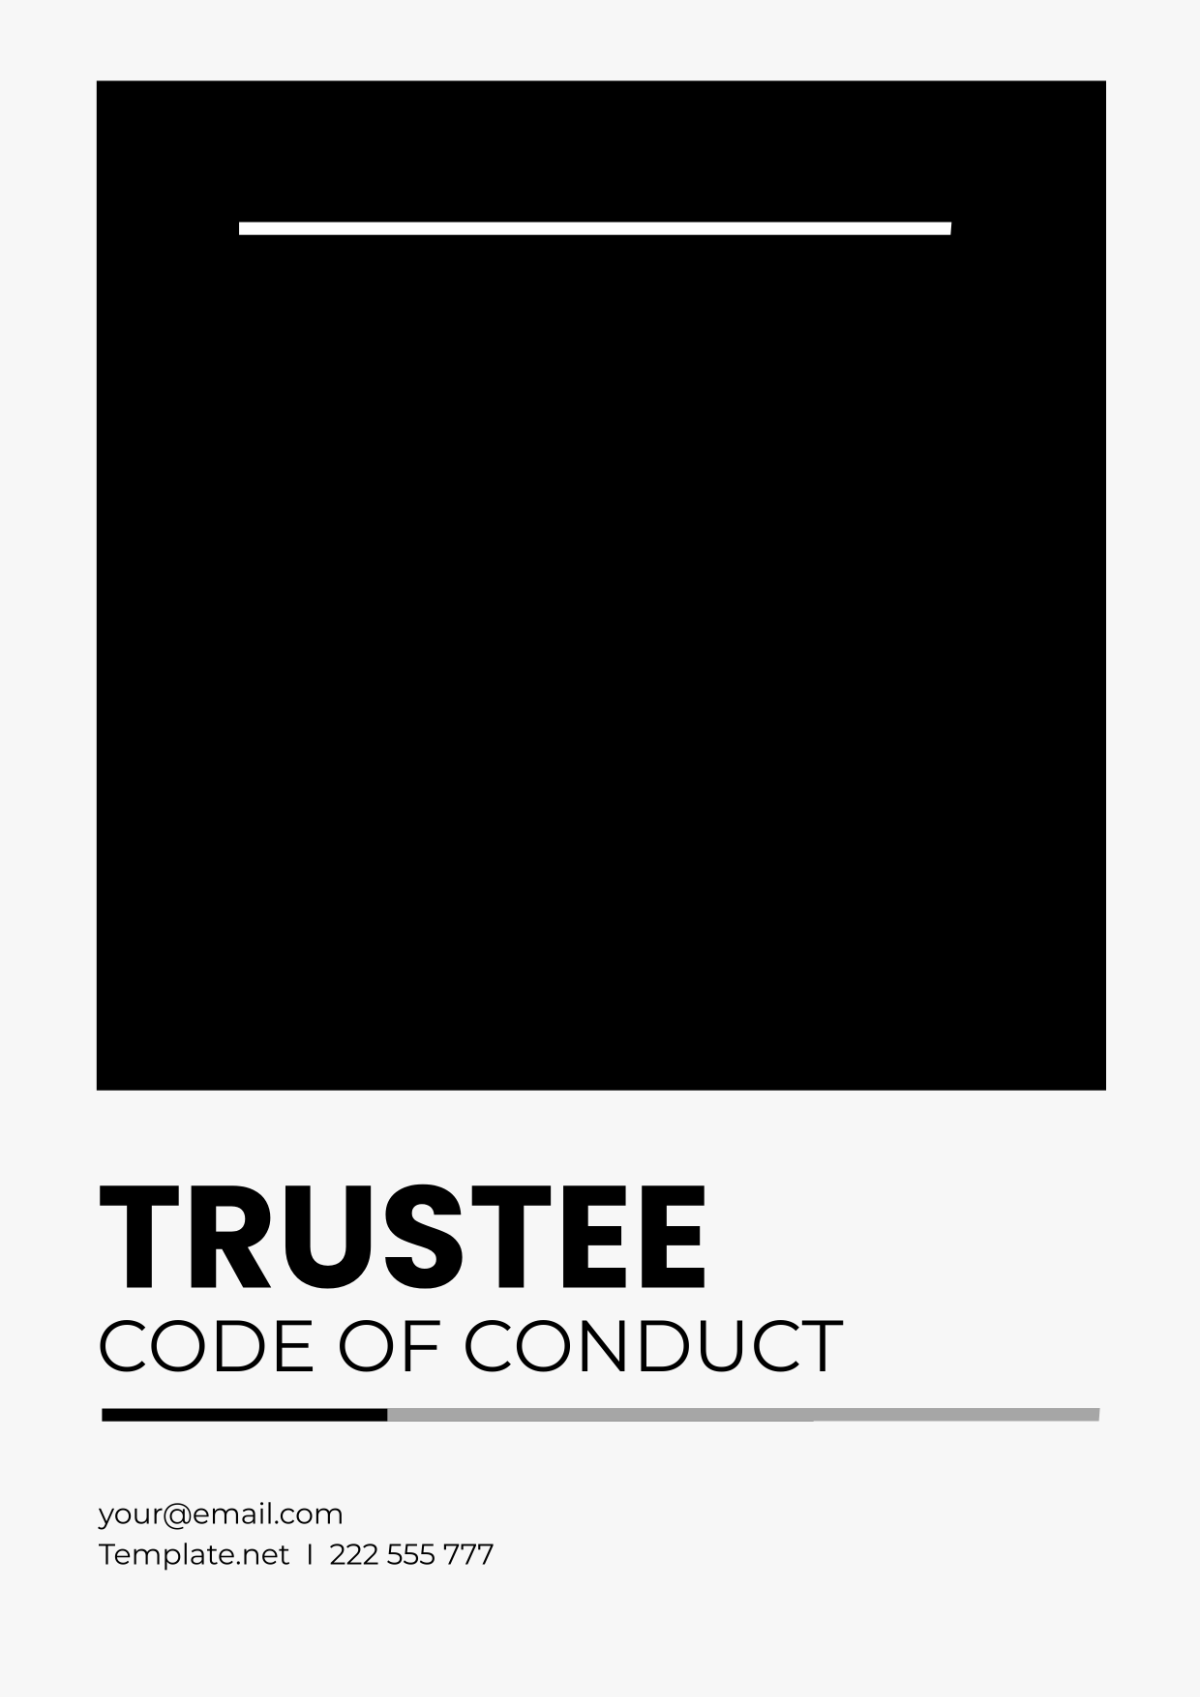 Free Trustee Code of Conduct Template